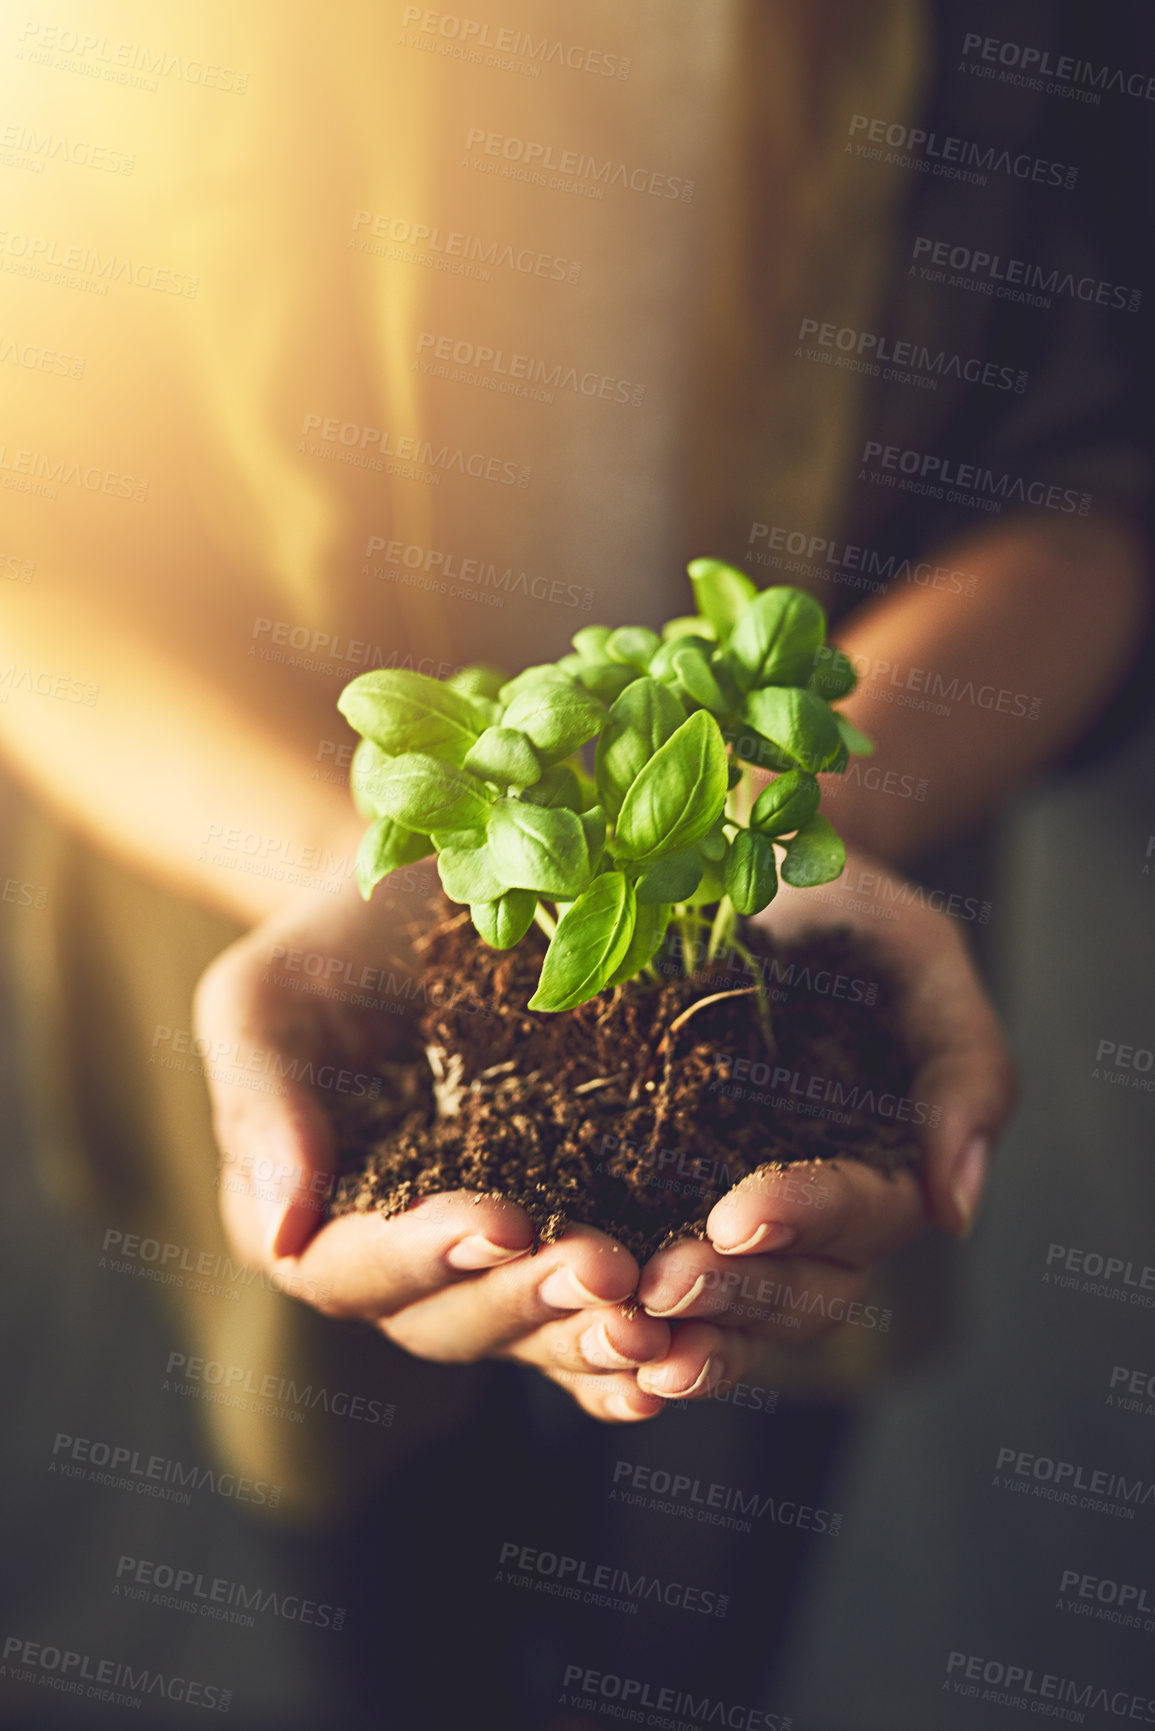 Buy stock photo Closeup shot of an unrecognizable woman holding a plant growing out of soil